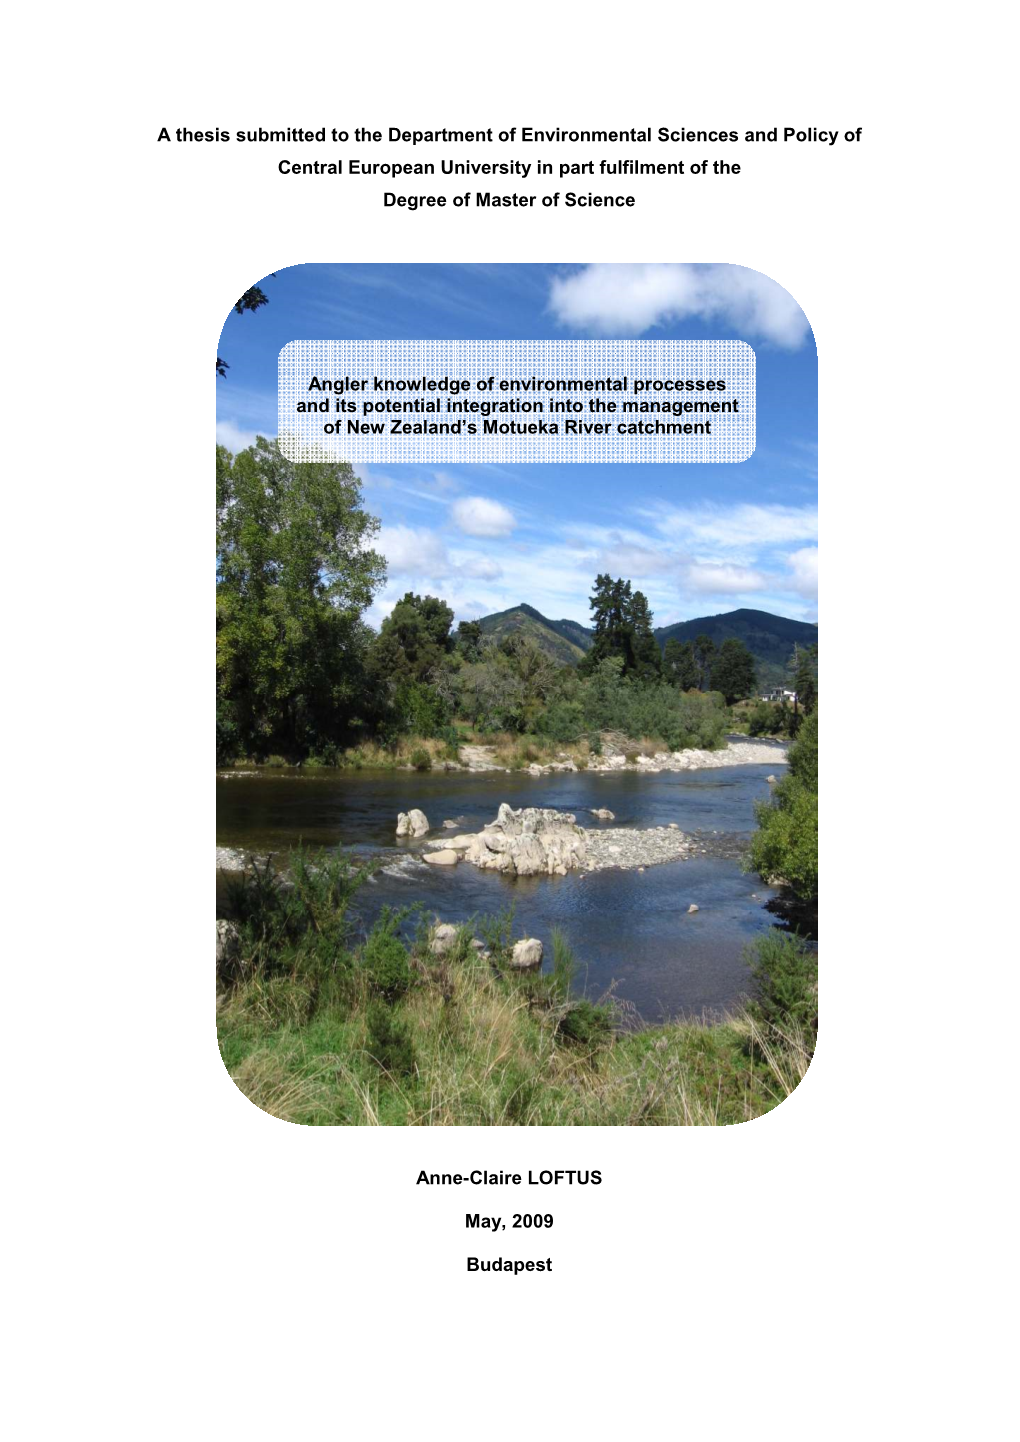 Angler Knowledge of Environmental Processes and Its Potential Integration Into the Management of New Zealand’S Motueka River Catchment